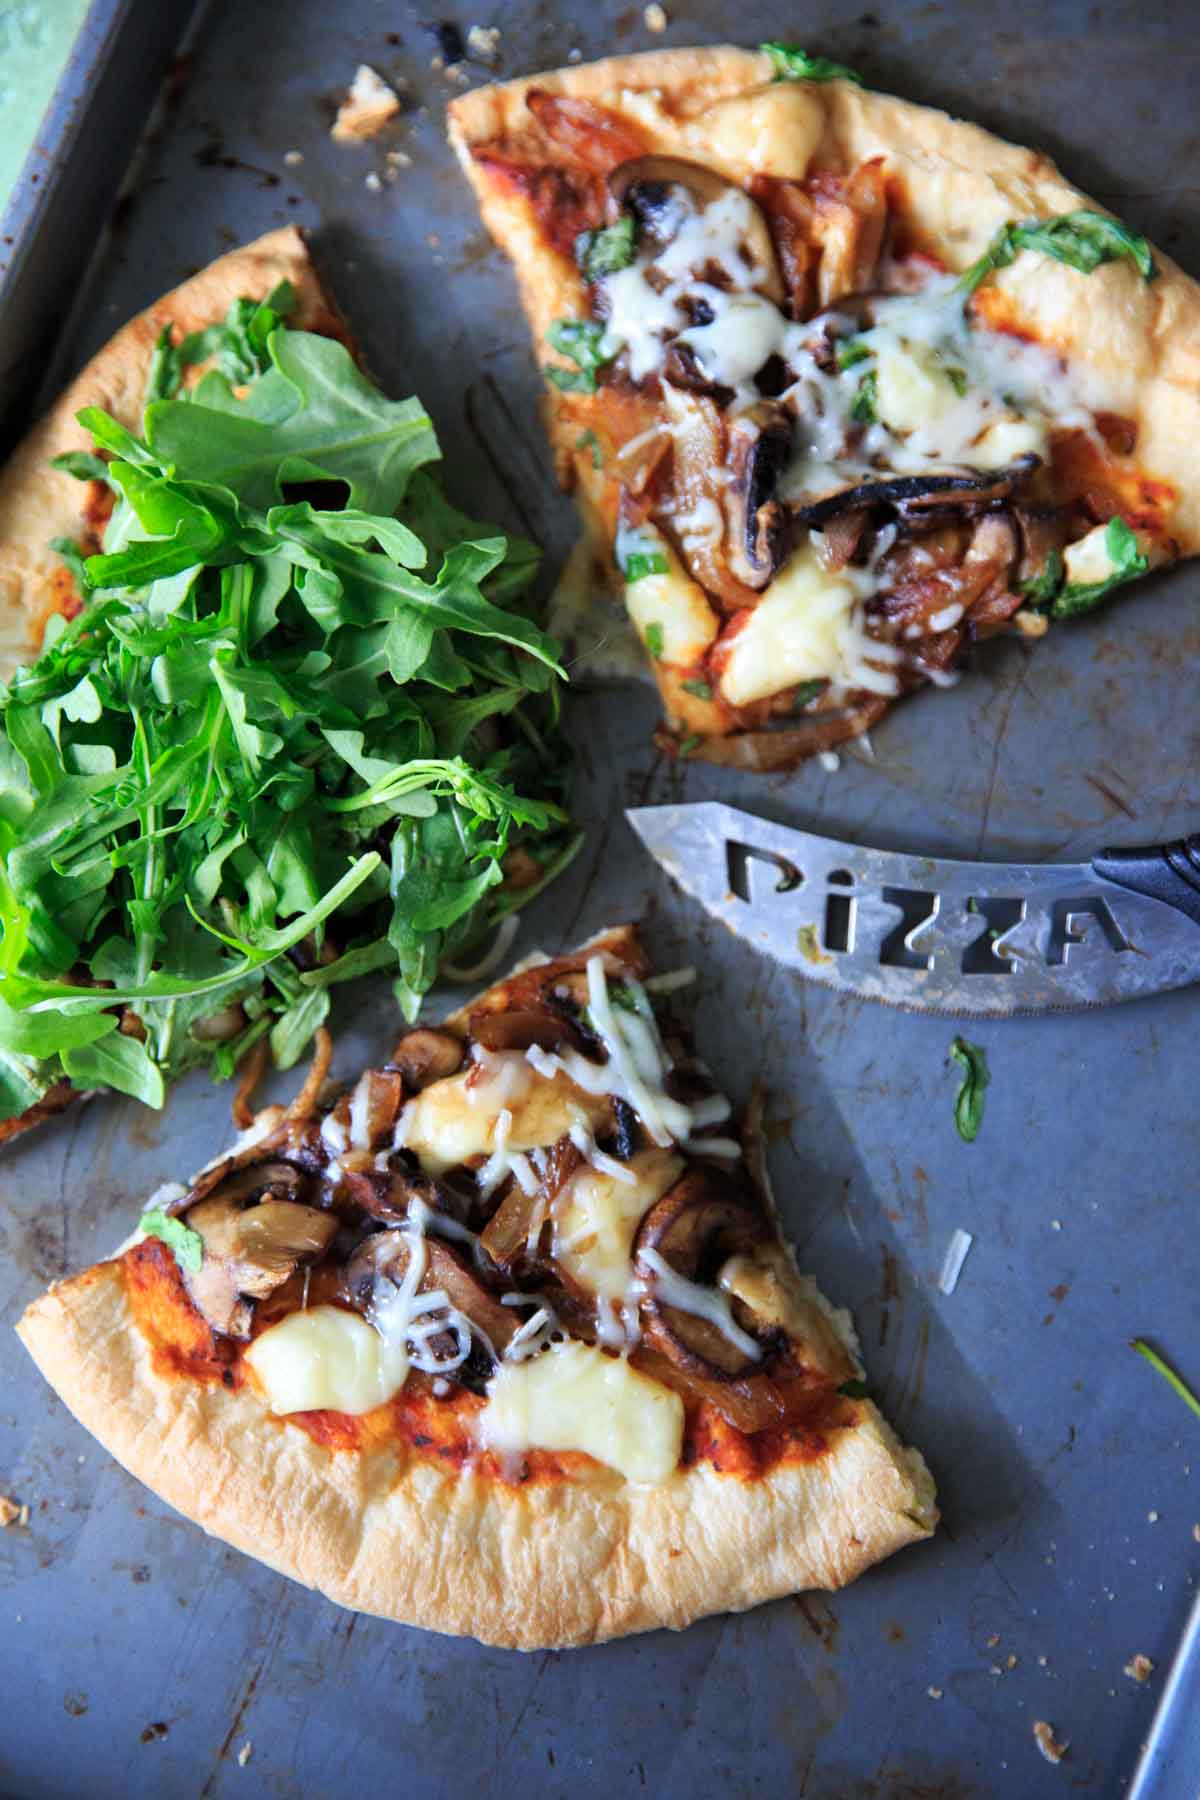 Homemade pizza with caramelized onions, fresh baby arugula and brie cheese, sliced next to a pizza cutter